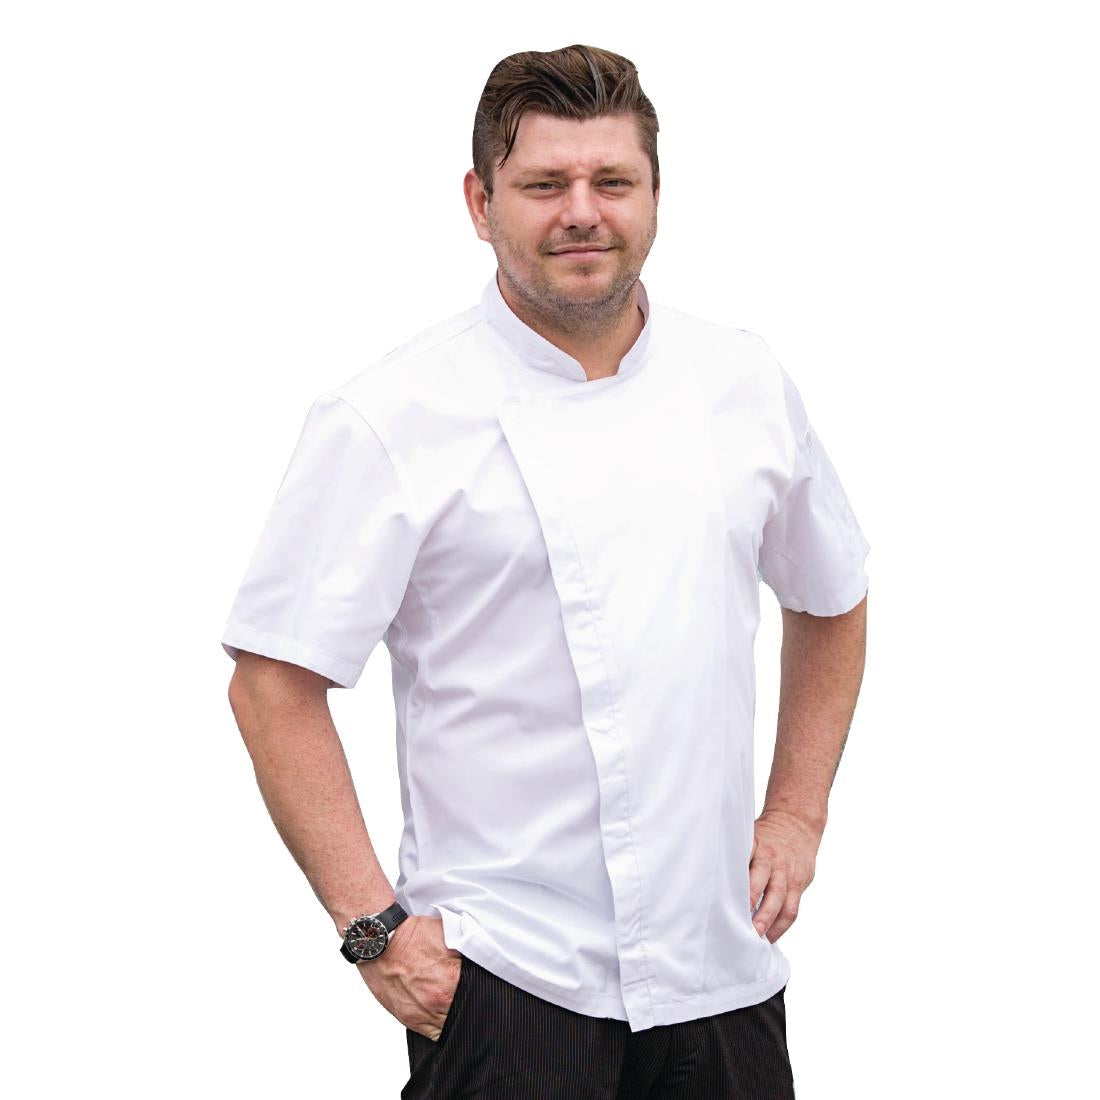 BB669-L Chef Works Cannes Short Sleeve Chefs Jacket Size L JD Catering Equipment Solutions Ltd